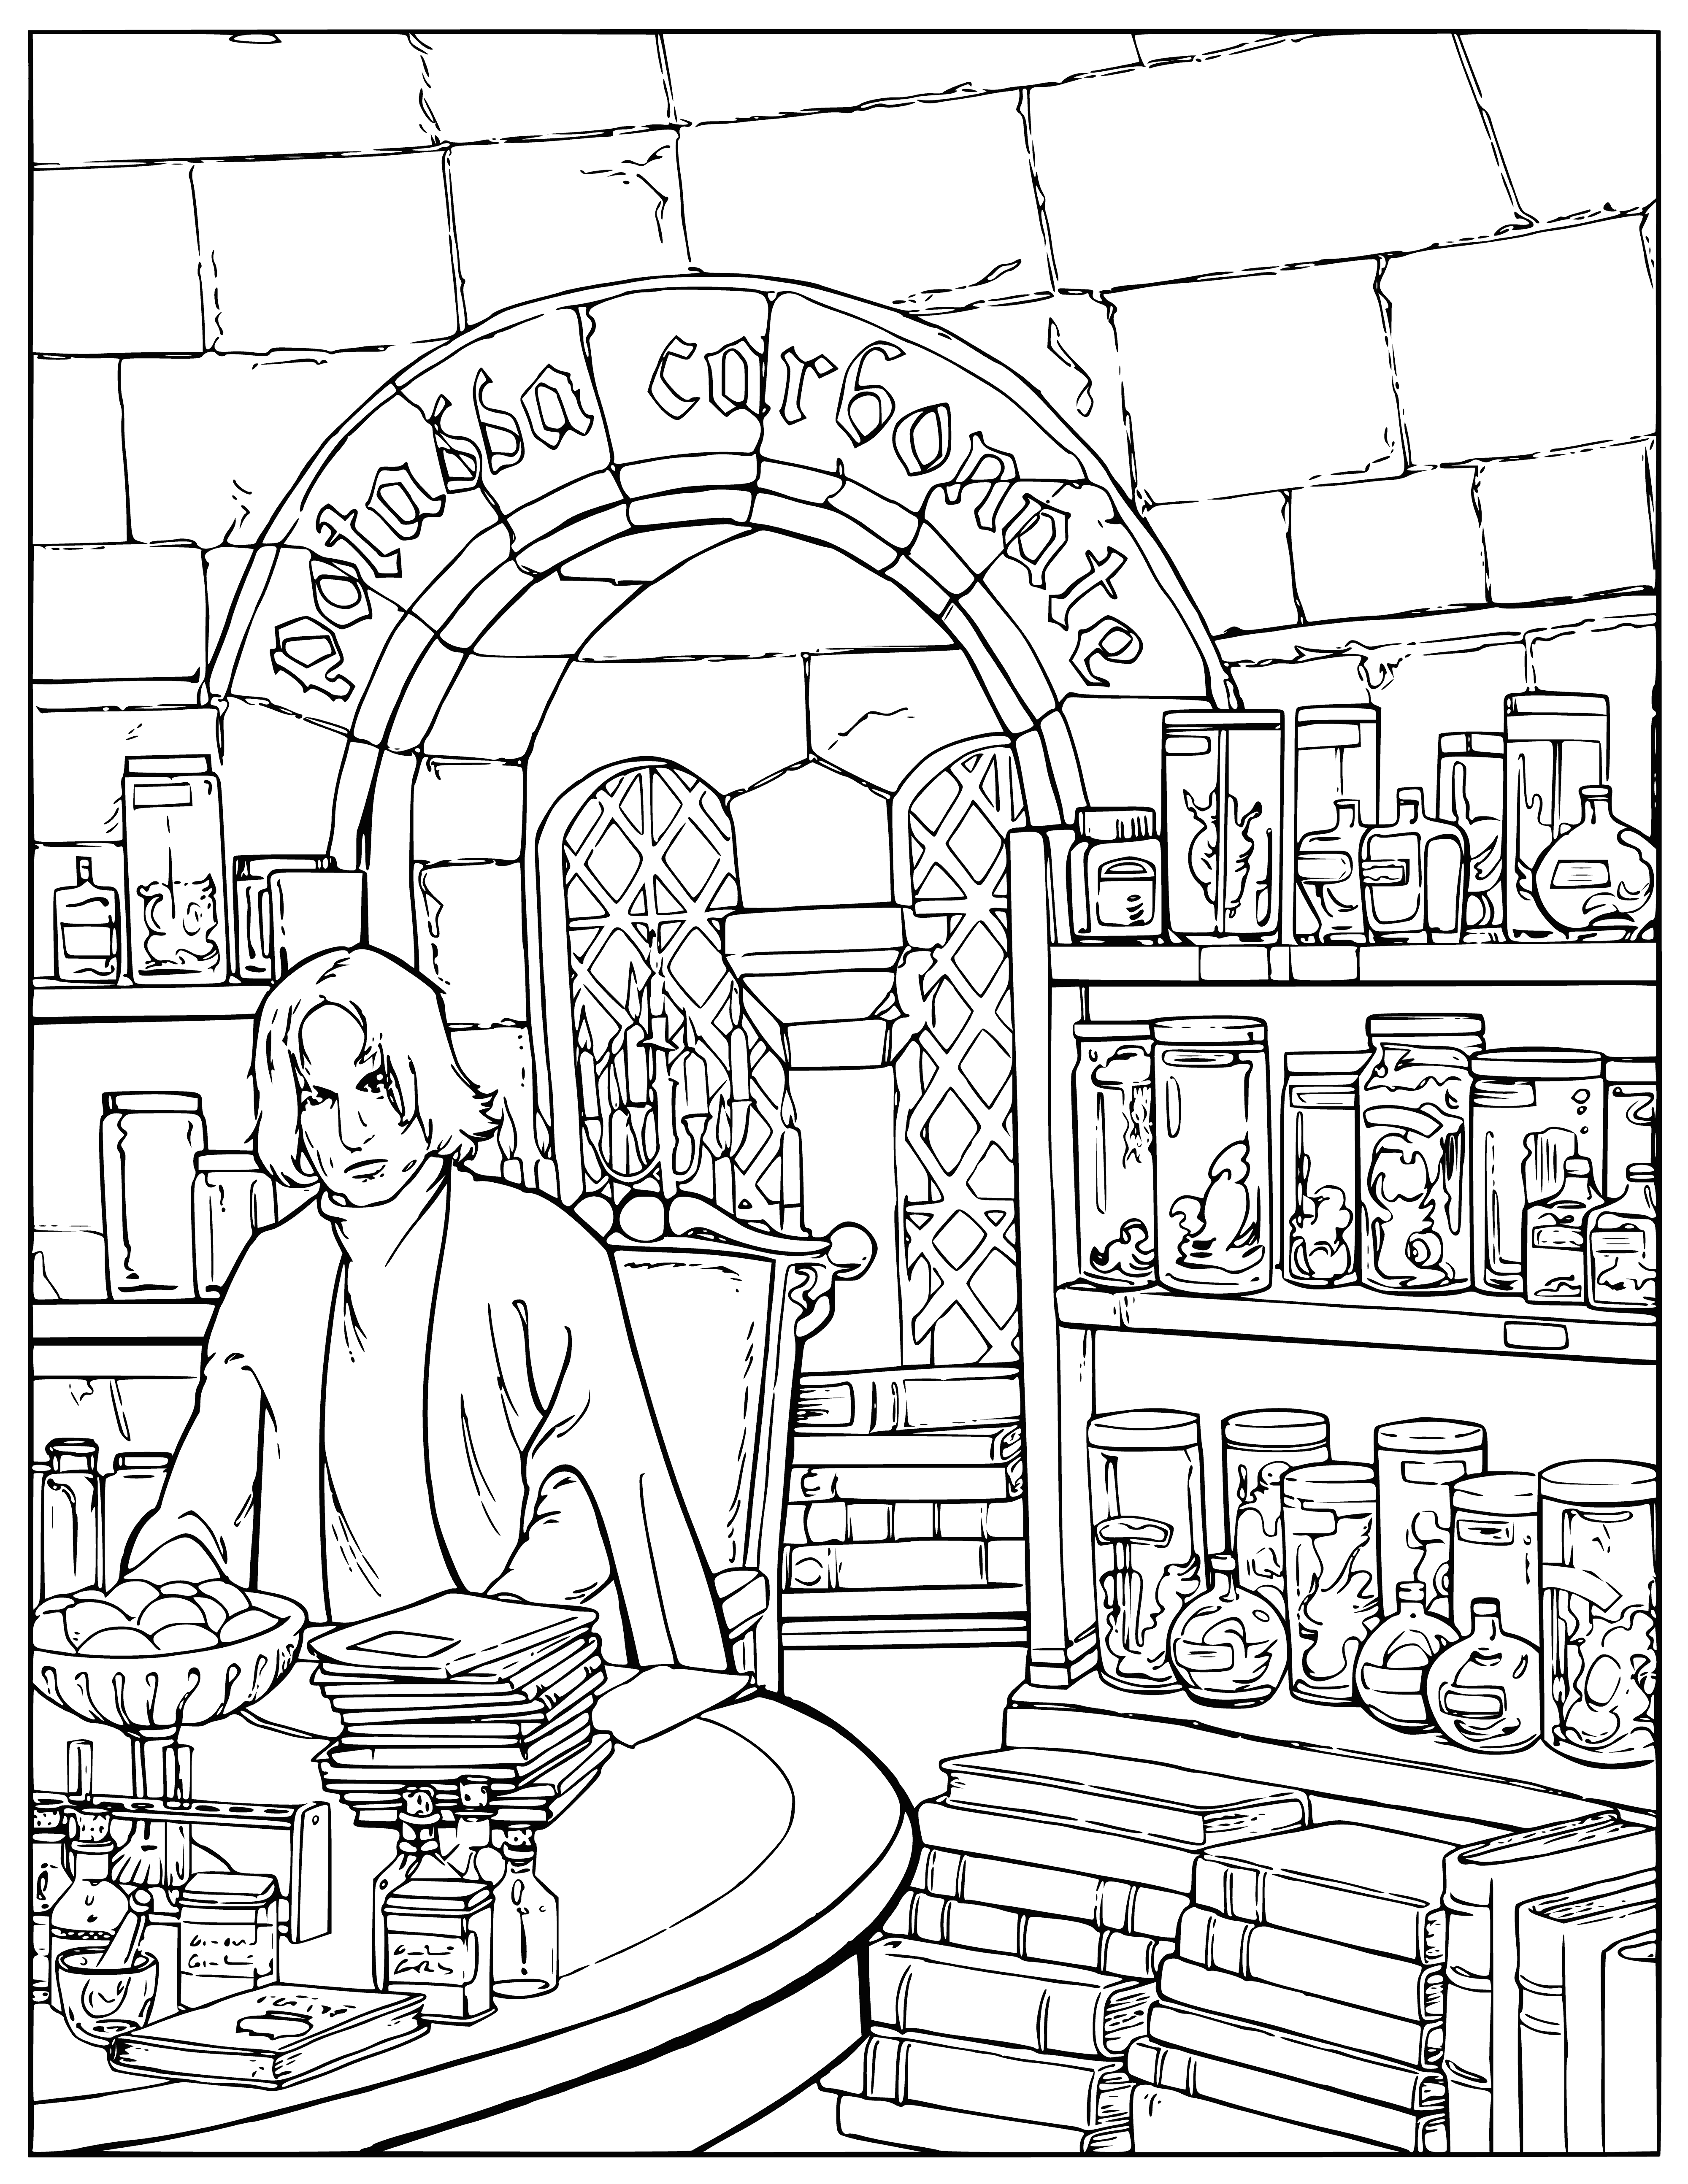 Severus Snape in the laboratory coloring page